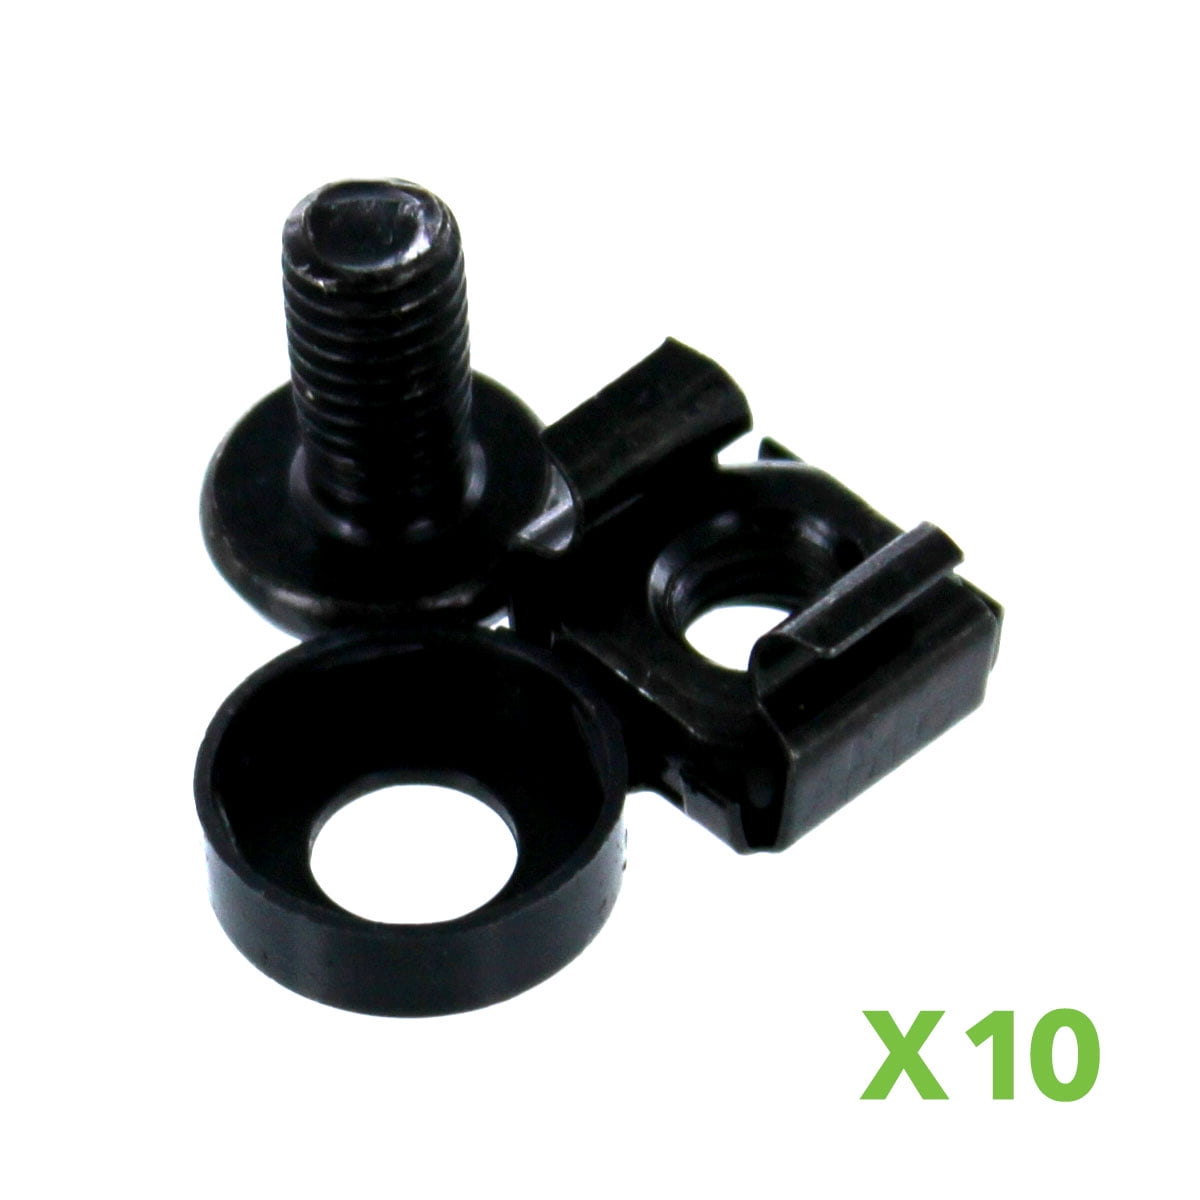 M6 Self-tapping Rack Mount Screw for Rack & cabinet 50 pcs black color